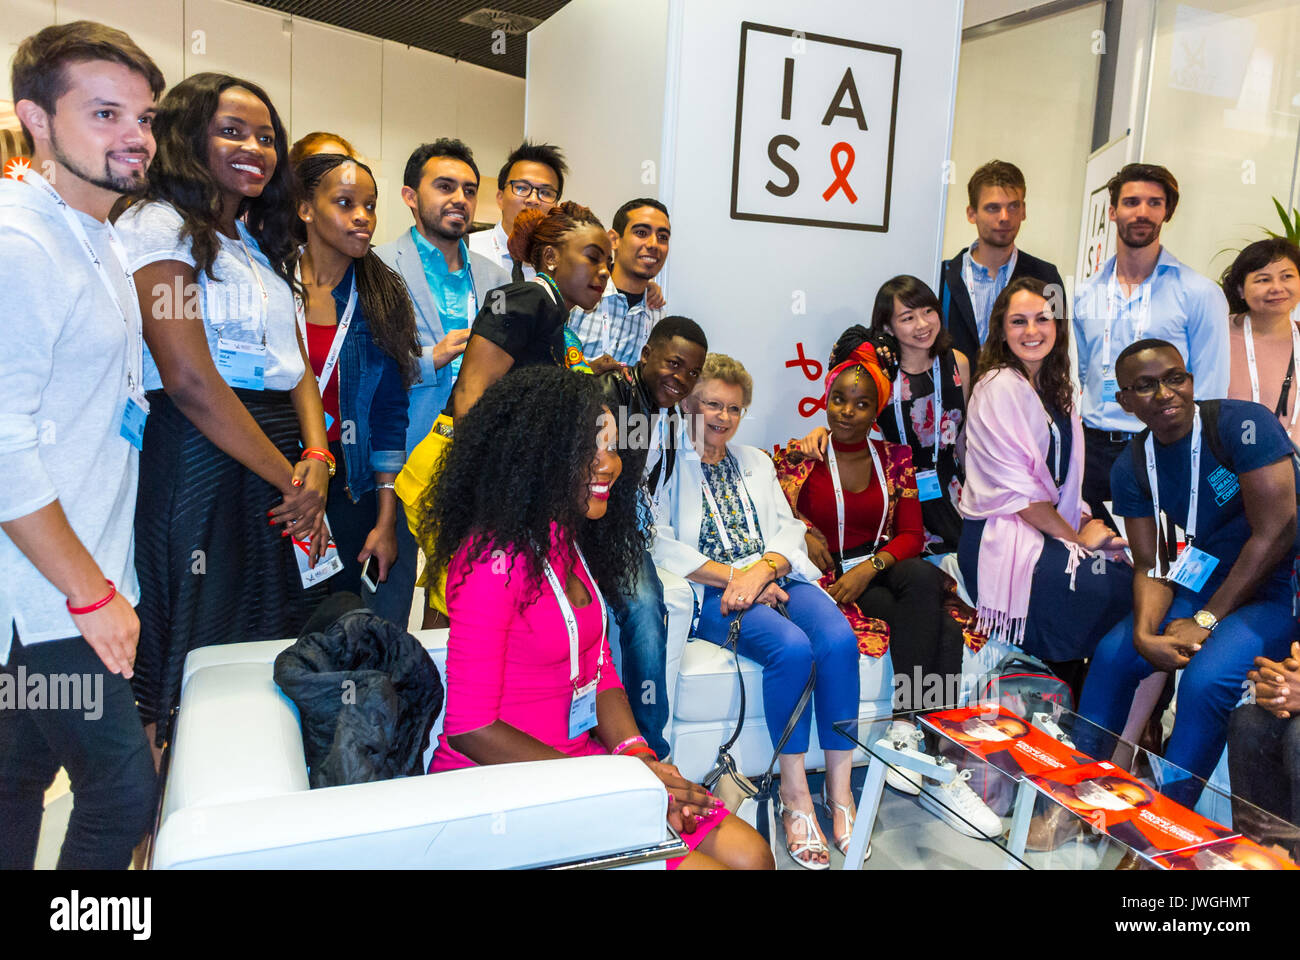 Paris, France, Group Portrait, Young Ambassadors to International AIDS Society I.A.S. Conference, diverse crowd of people, NGO, france multicultural crowd, multiracial citizens, crowd teenagers Stock Photo